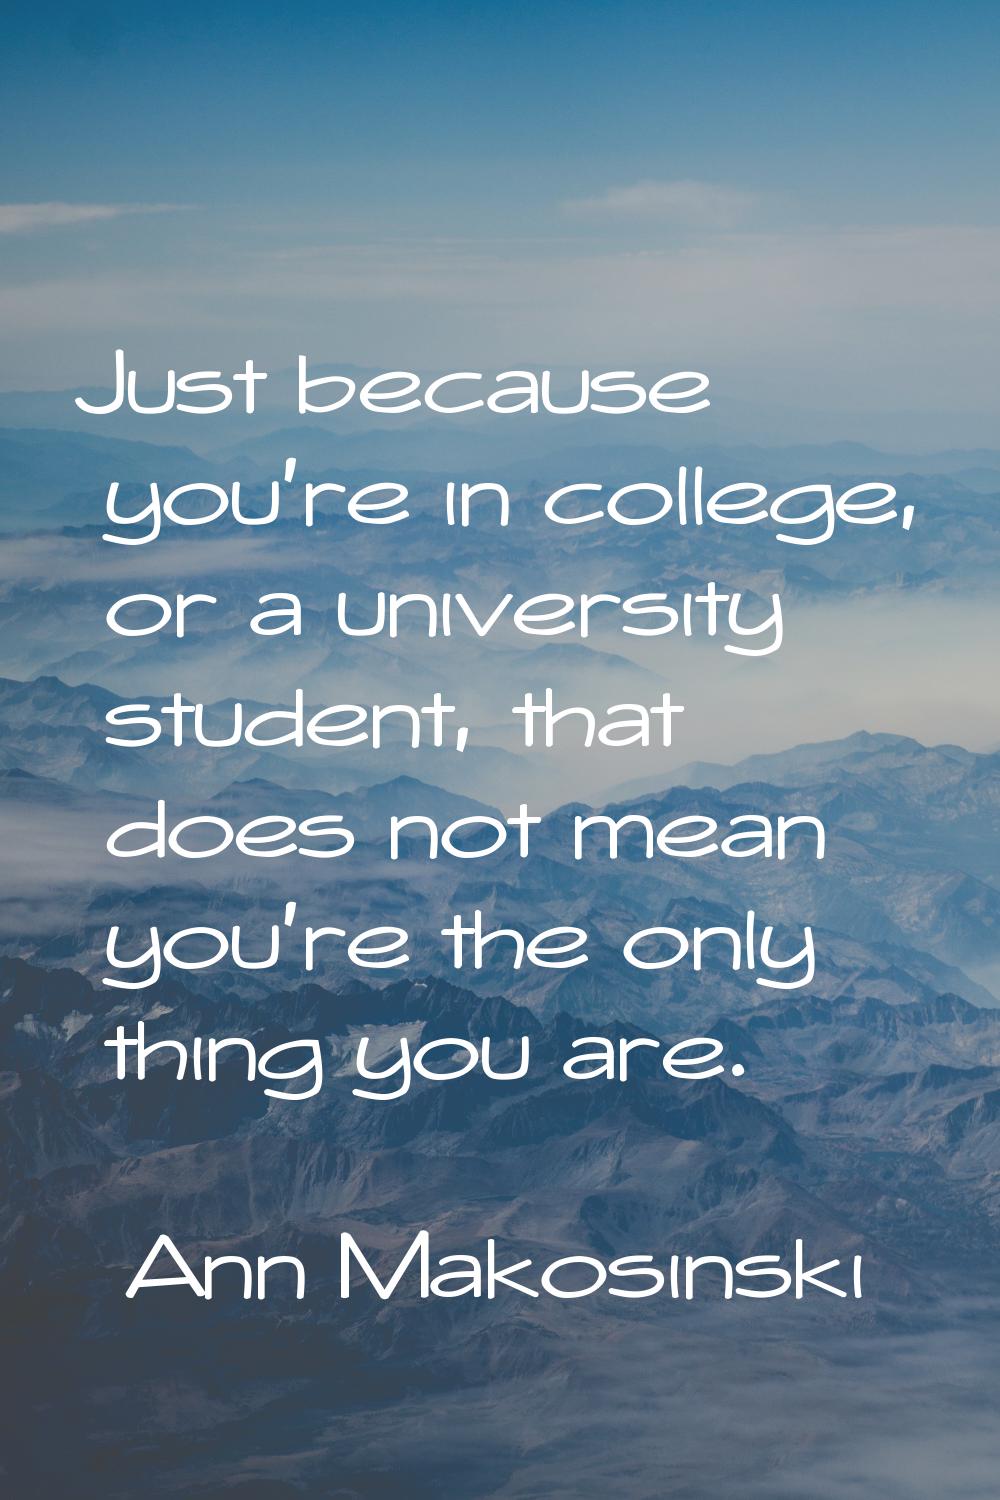 Just because you're in college, or a university student, that does not mean you're the only thing y